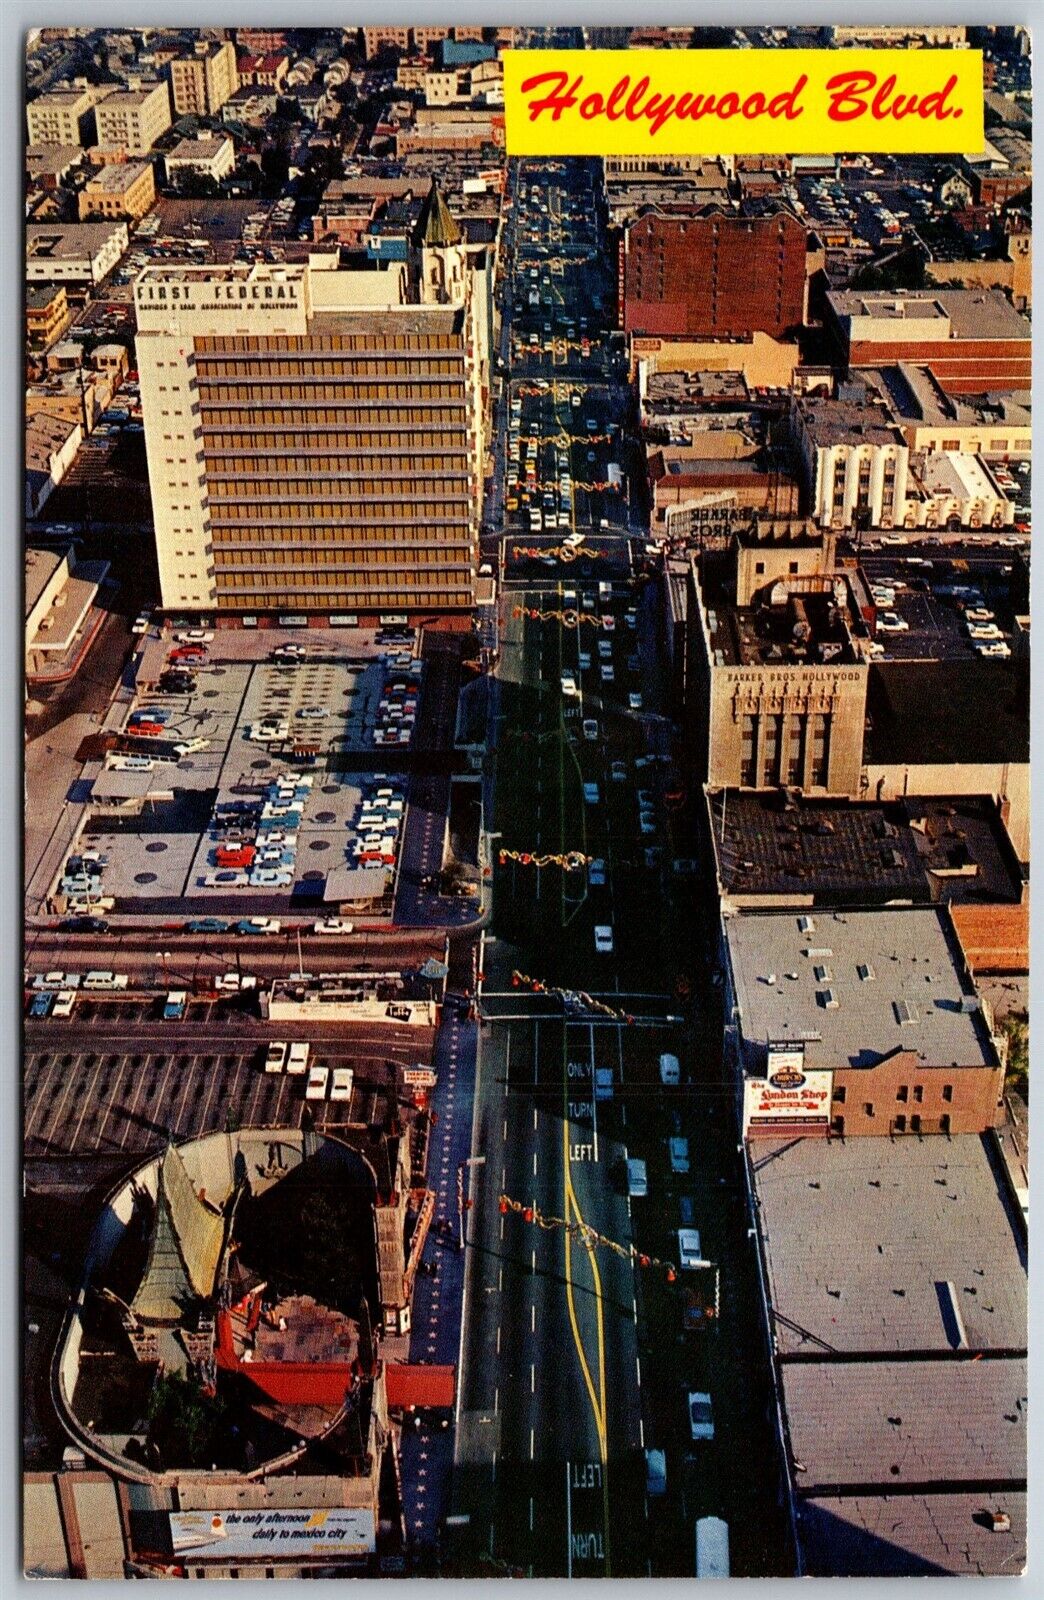 Vtg California CA Hollywood Boulevard From Helicopter Street View Postcard